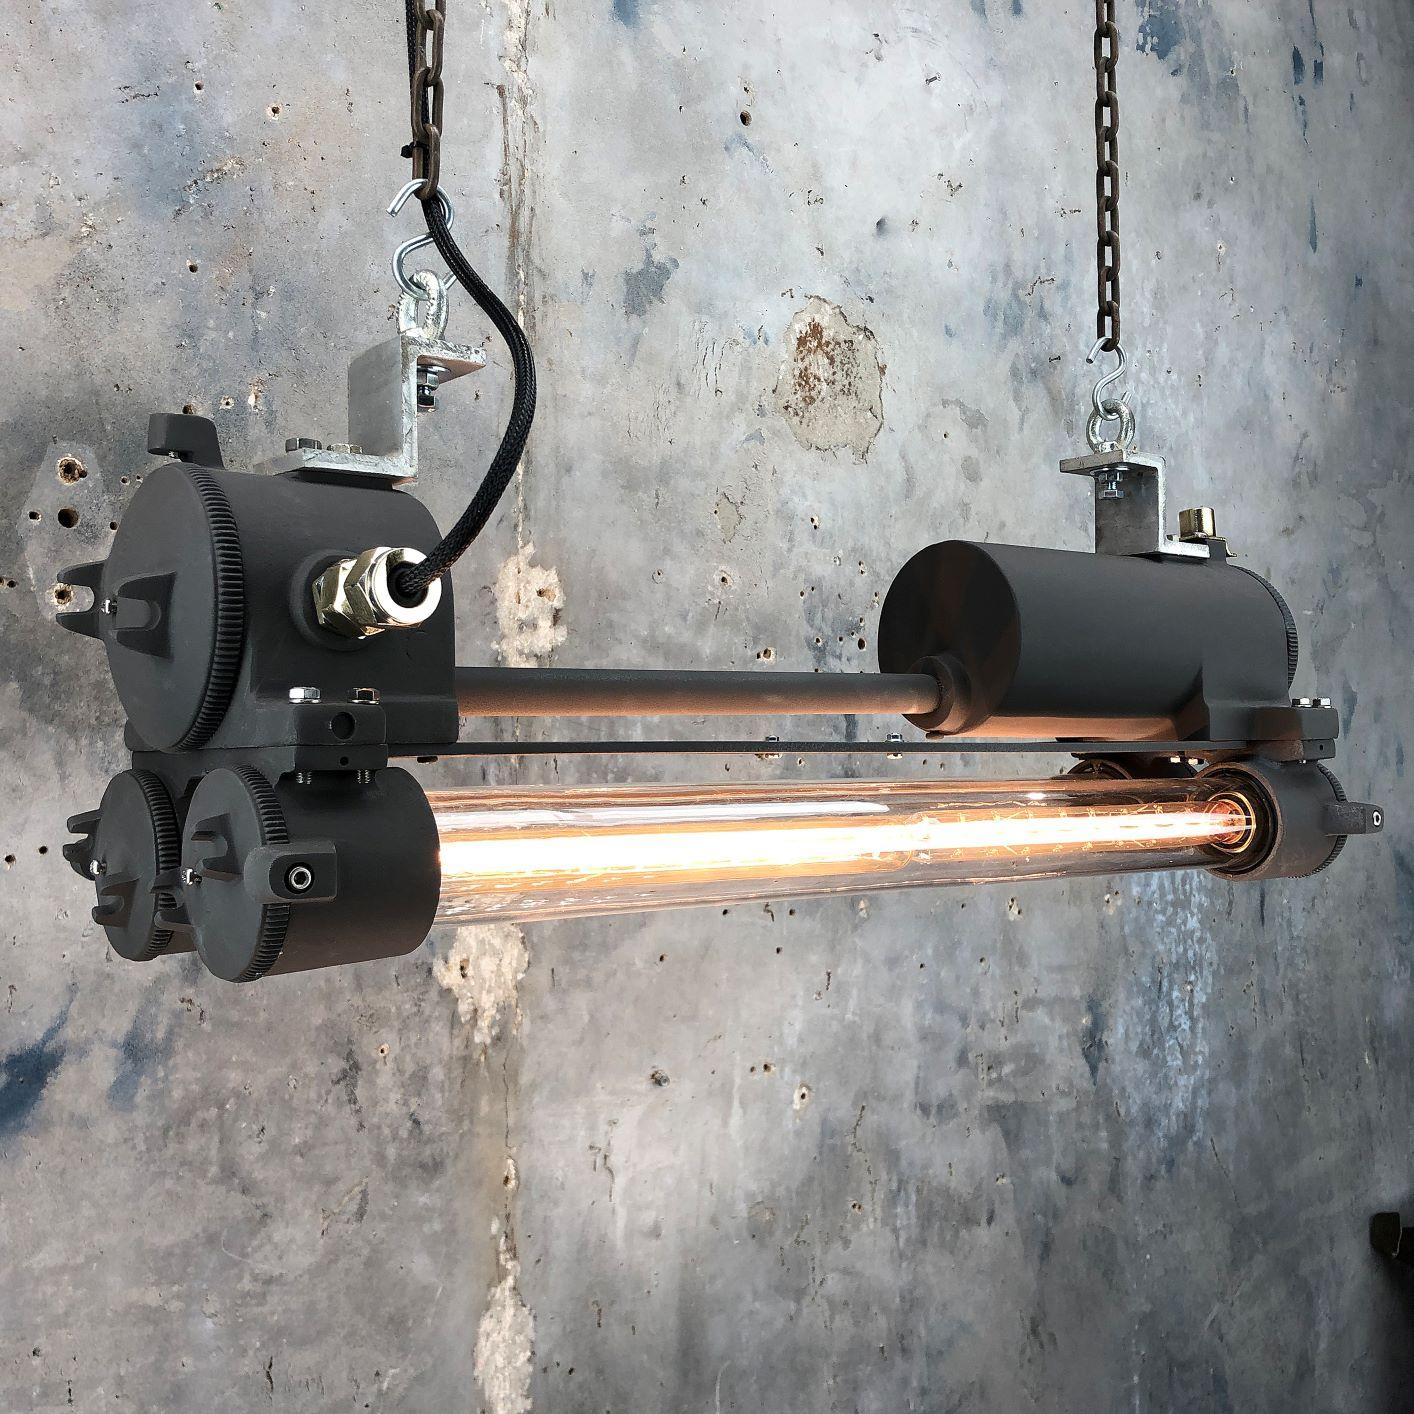 A vintage industrial 1970s black flameproof Edison twin striplight made c1977 by Daeyang, a South Korean manufacturer of industrial grade fixtures and fittings. 

Salvaged from military vessels then professionally restored by Loomlight in the UK